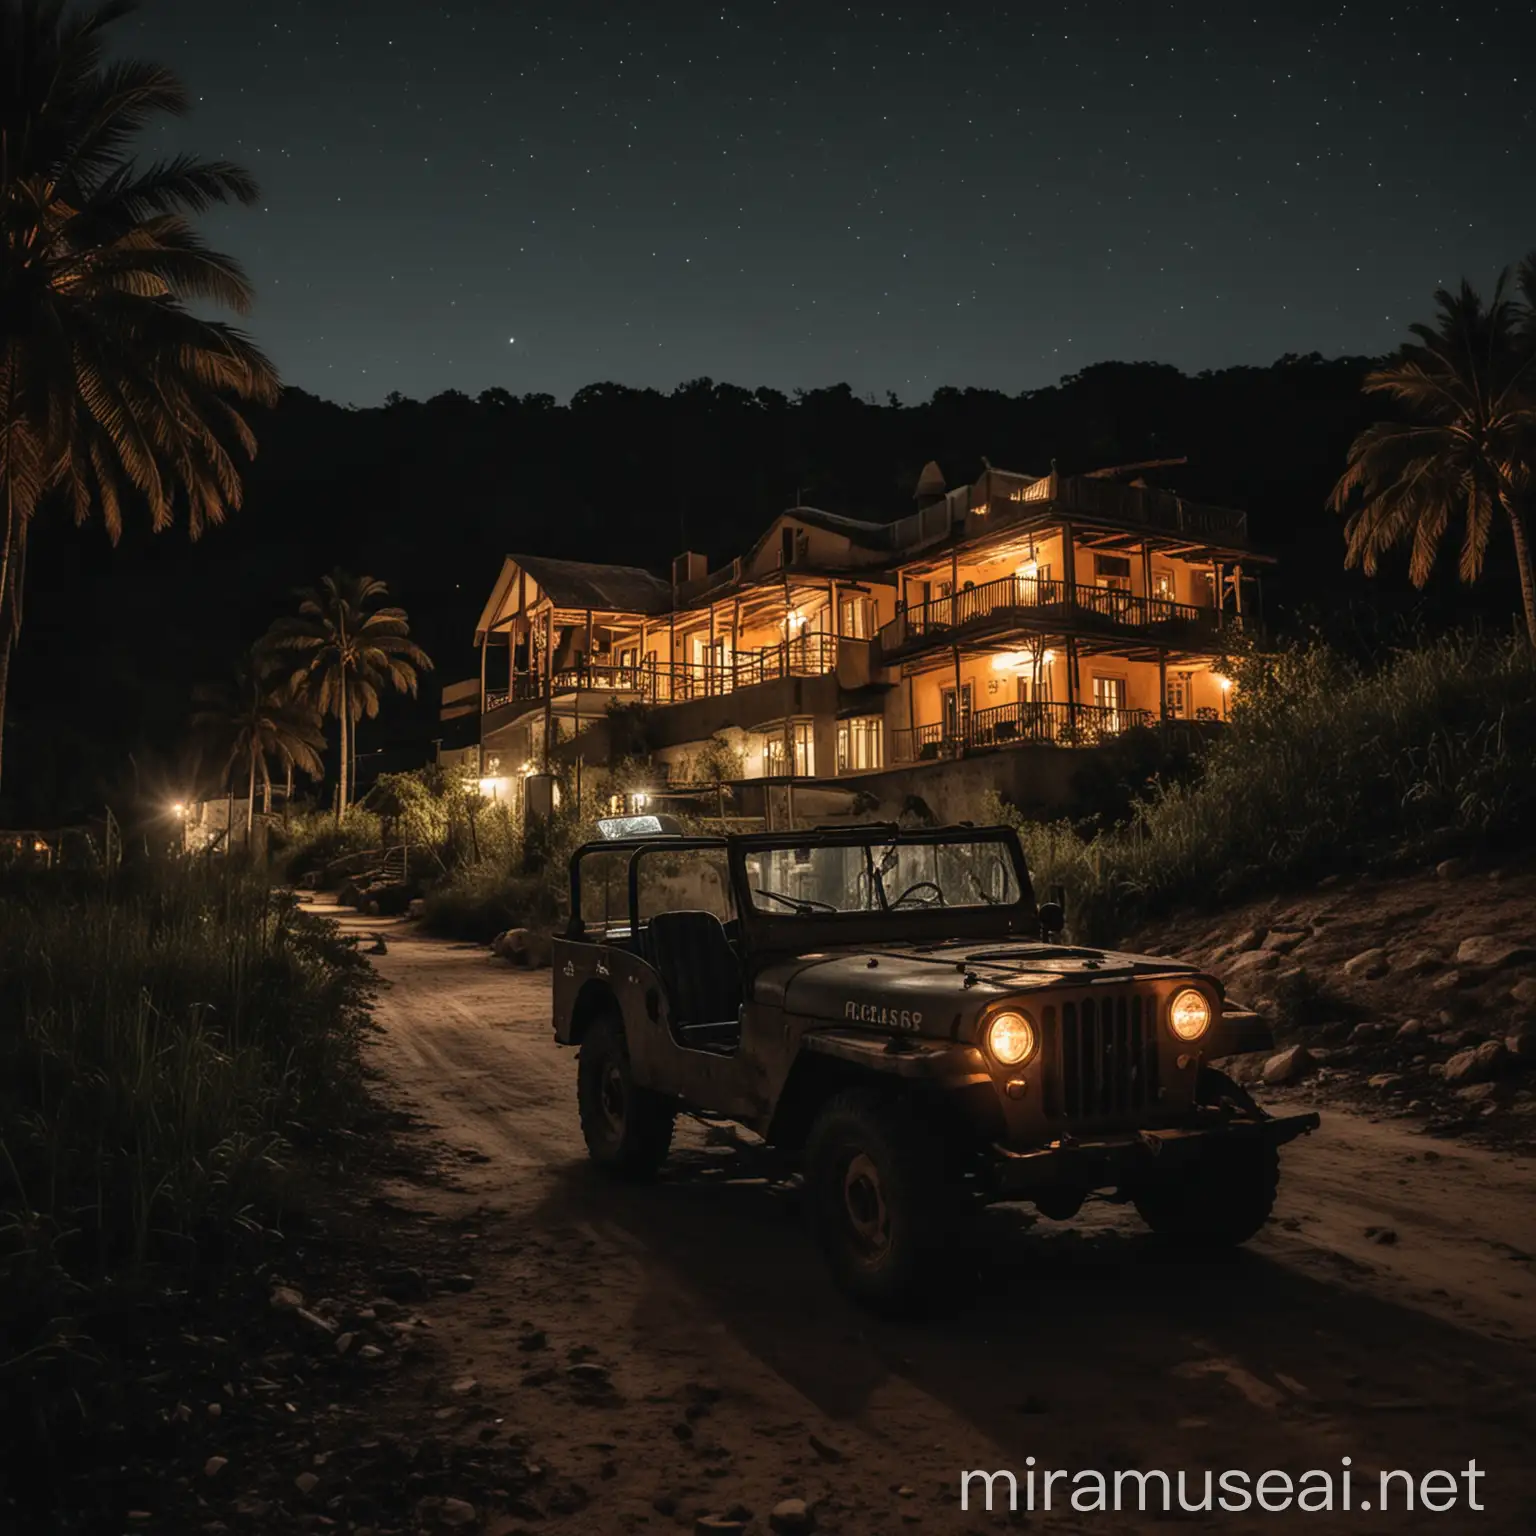 Vintage Jeep Approaching Deserted Resort at Night